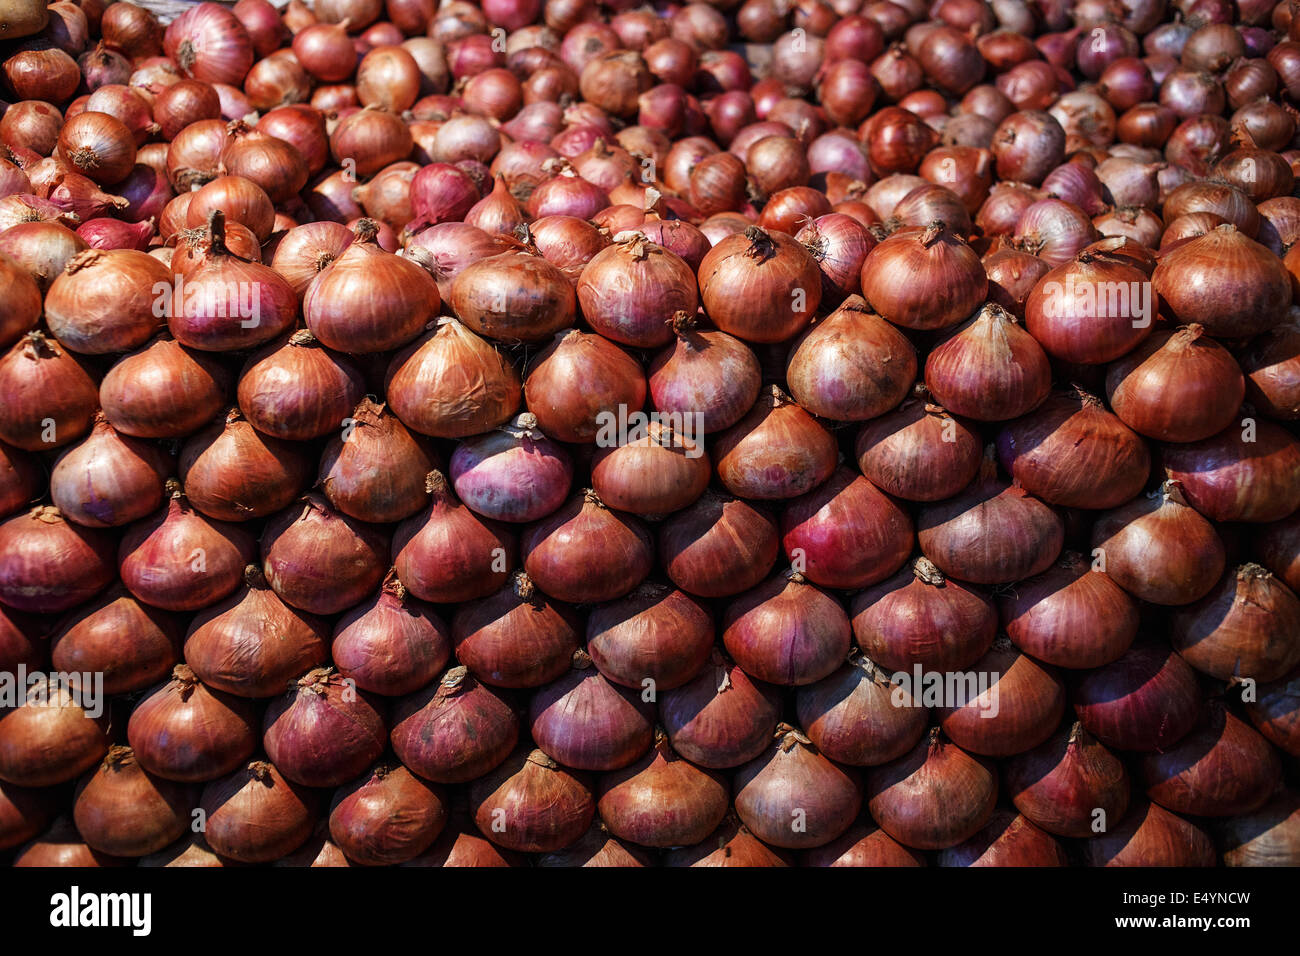 Onions for sale at vegetable market in Dadar, Mumbai. Stock Photo